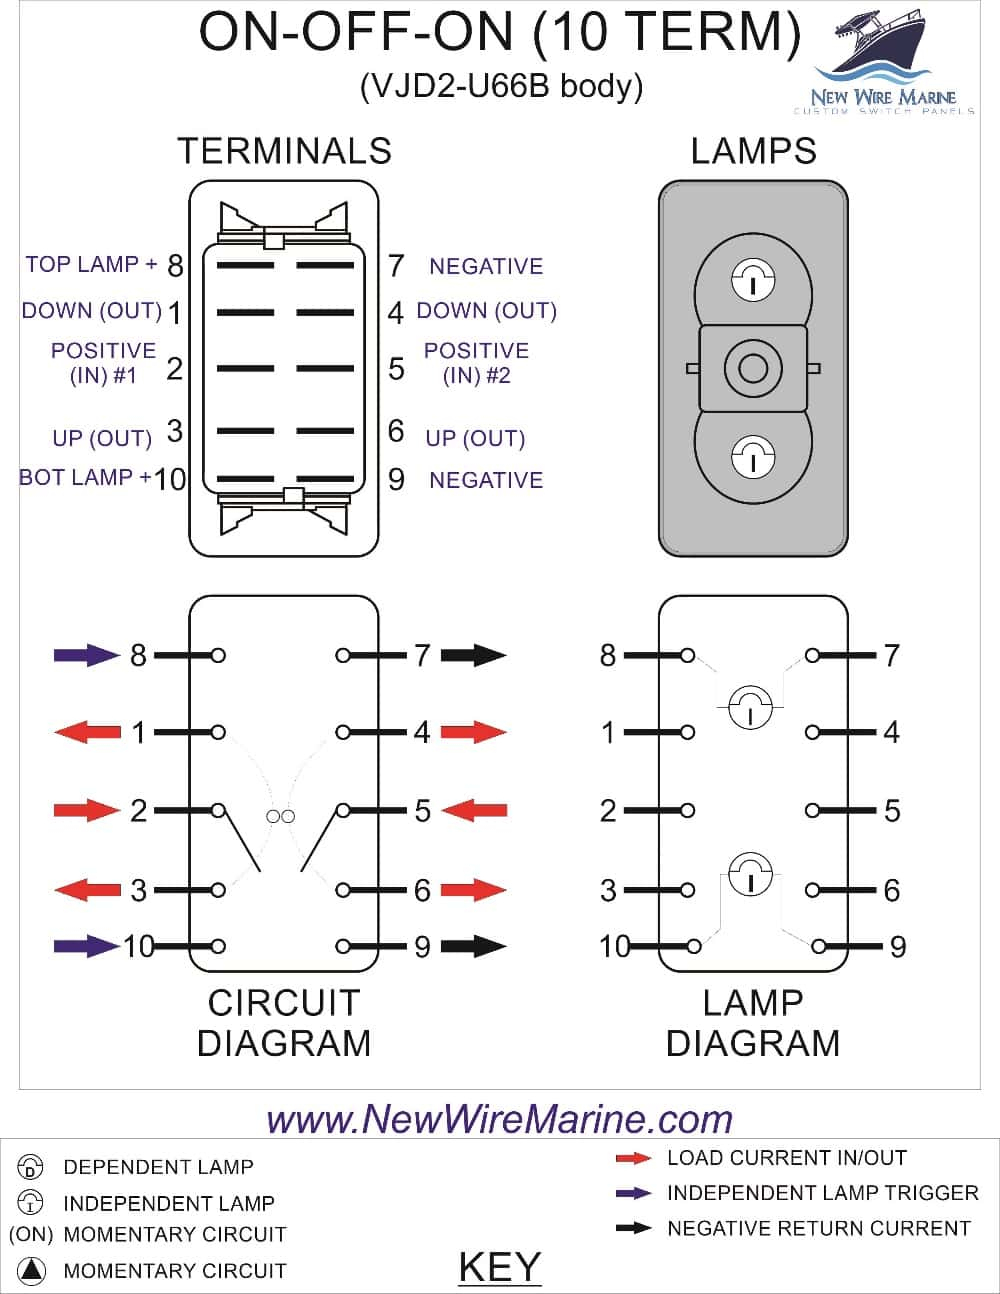 On-Off-On Backlit Rocker Switch | Red Led | New Wire Marine - Dpdt Switch Wiring Diagram